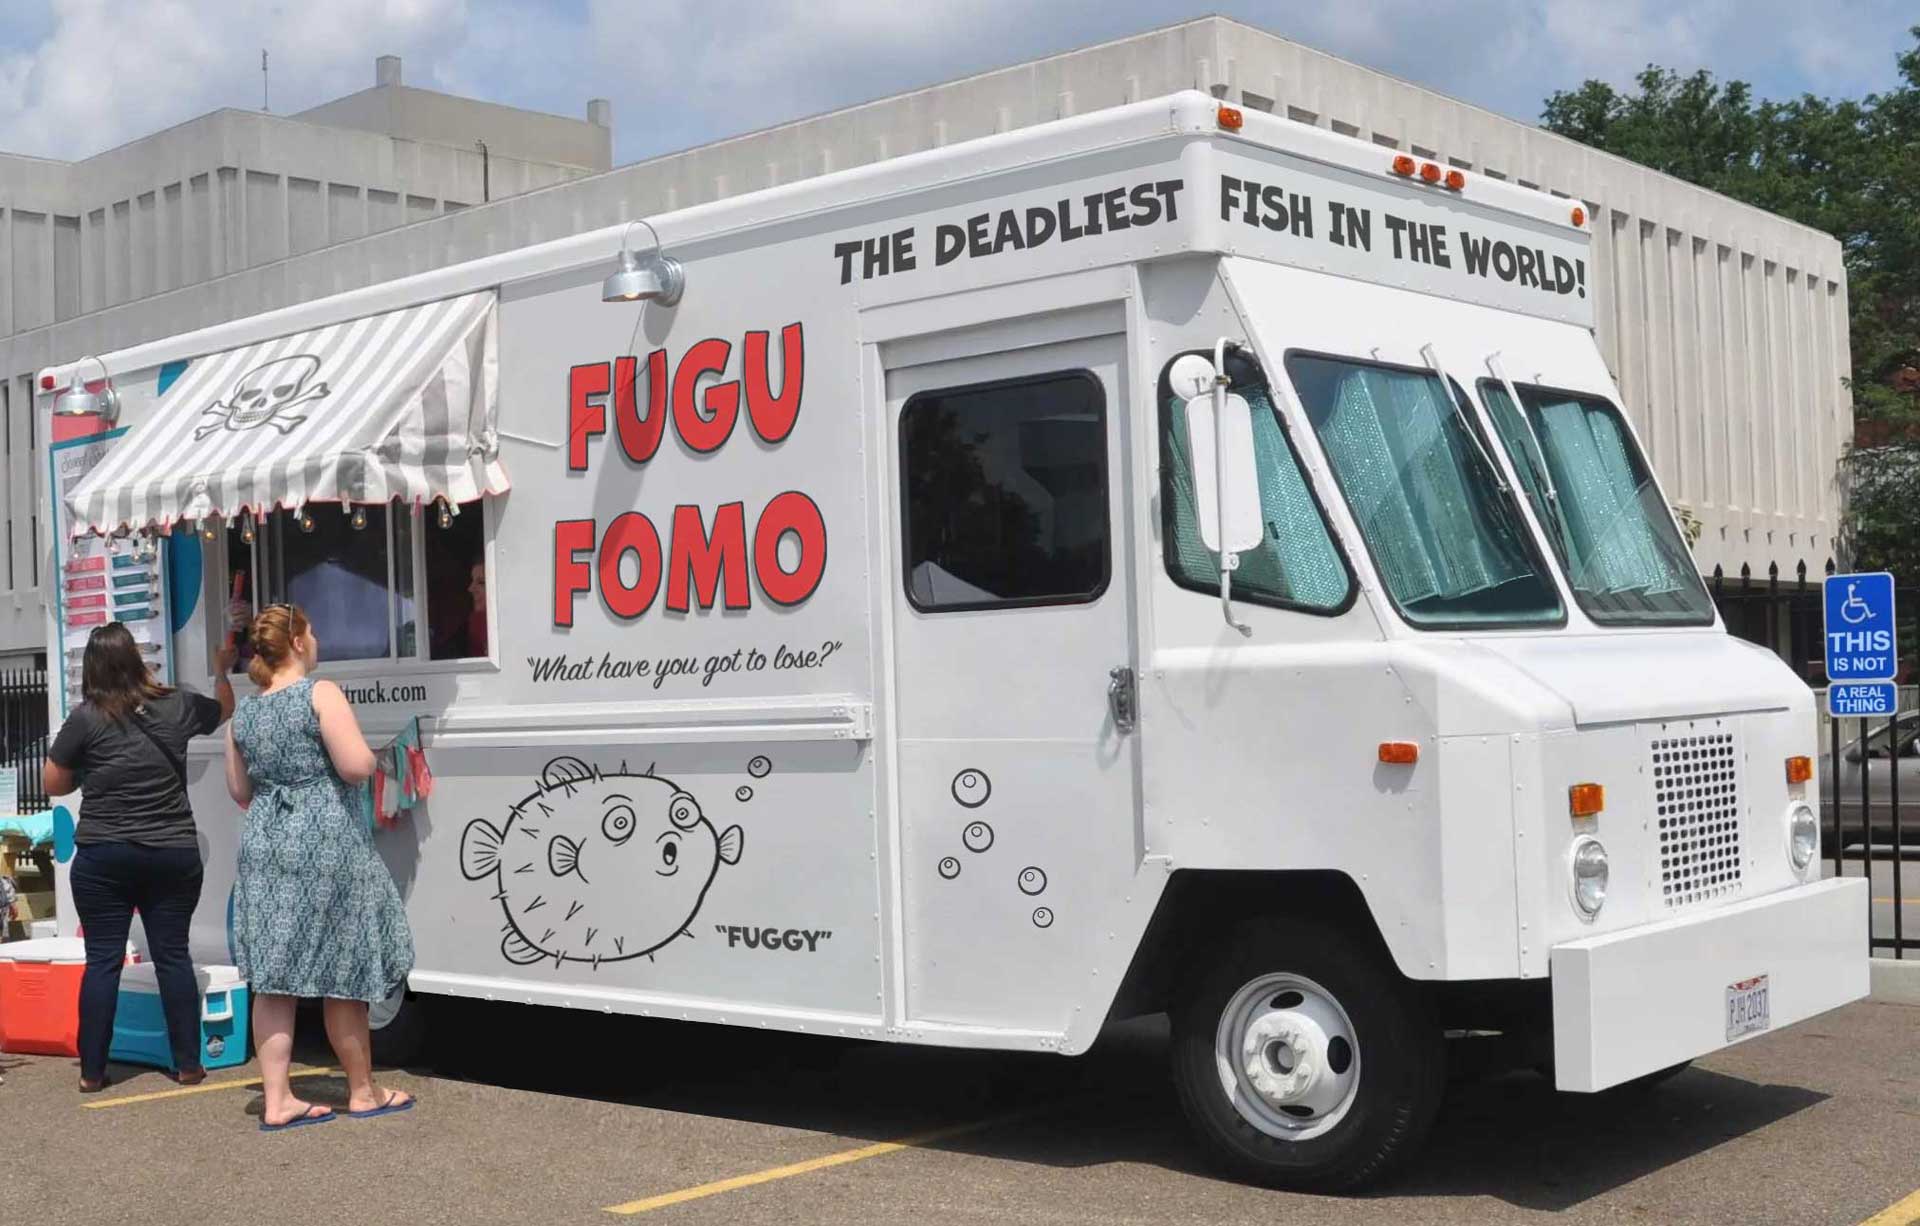 THIS IS NOT A REAL FOOD TRUCK